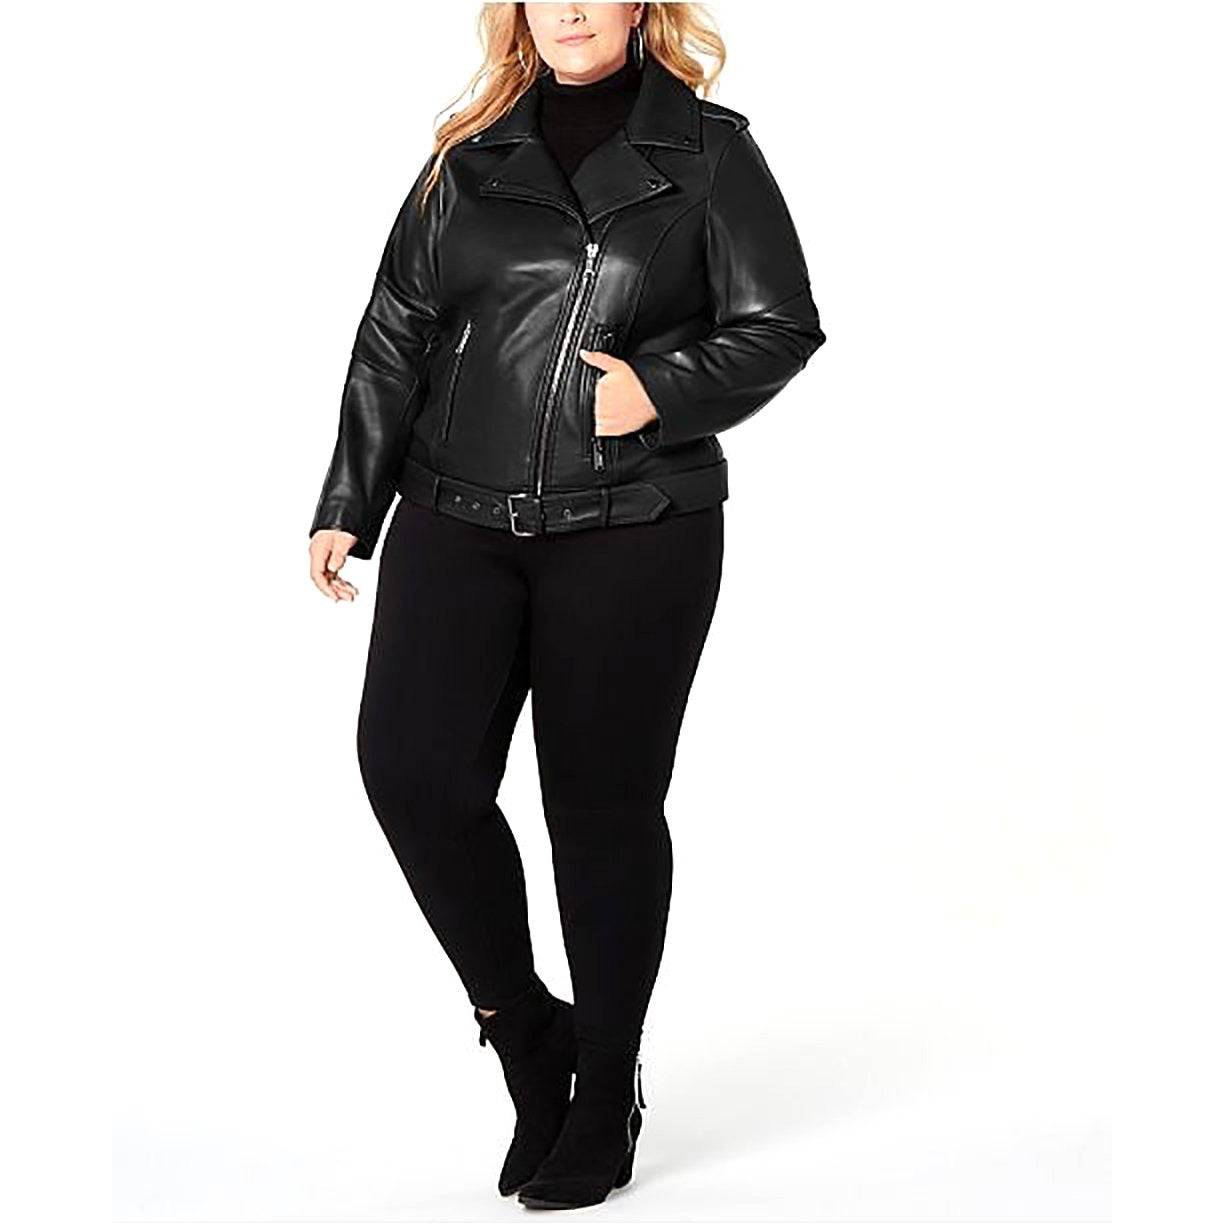 udtale brydning passe Michael Kors Women's Plus Size Moto Leather Jacket with Belt – Zooloo  Leather